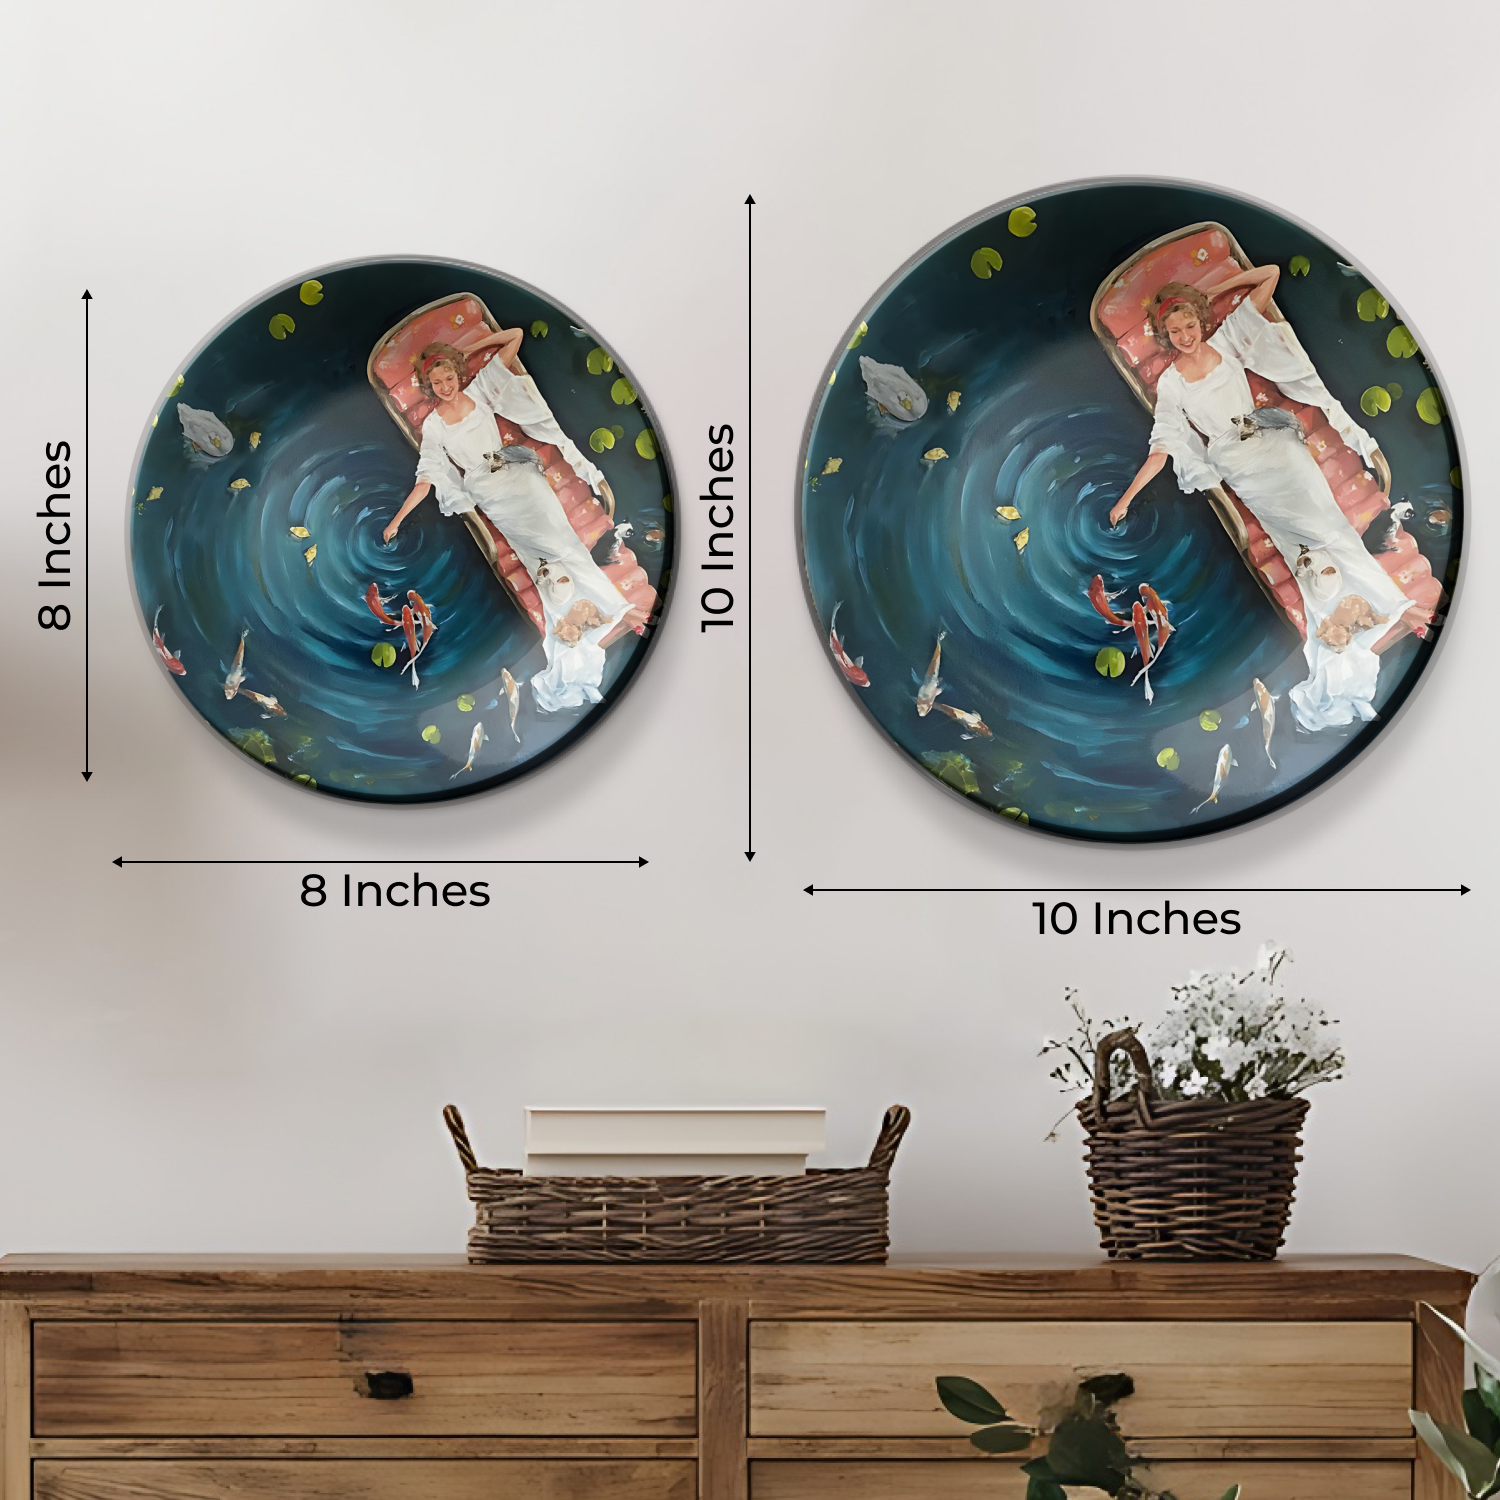 Tranquil wall plate featuring a water garden motif plates on wall